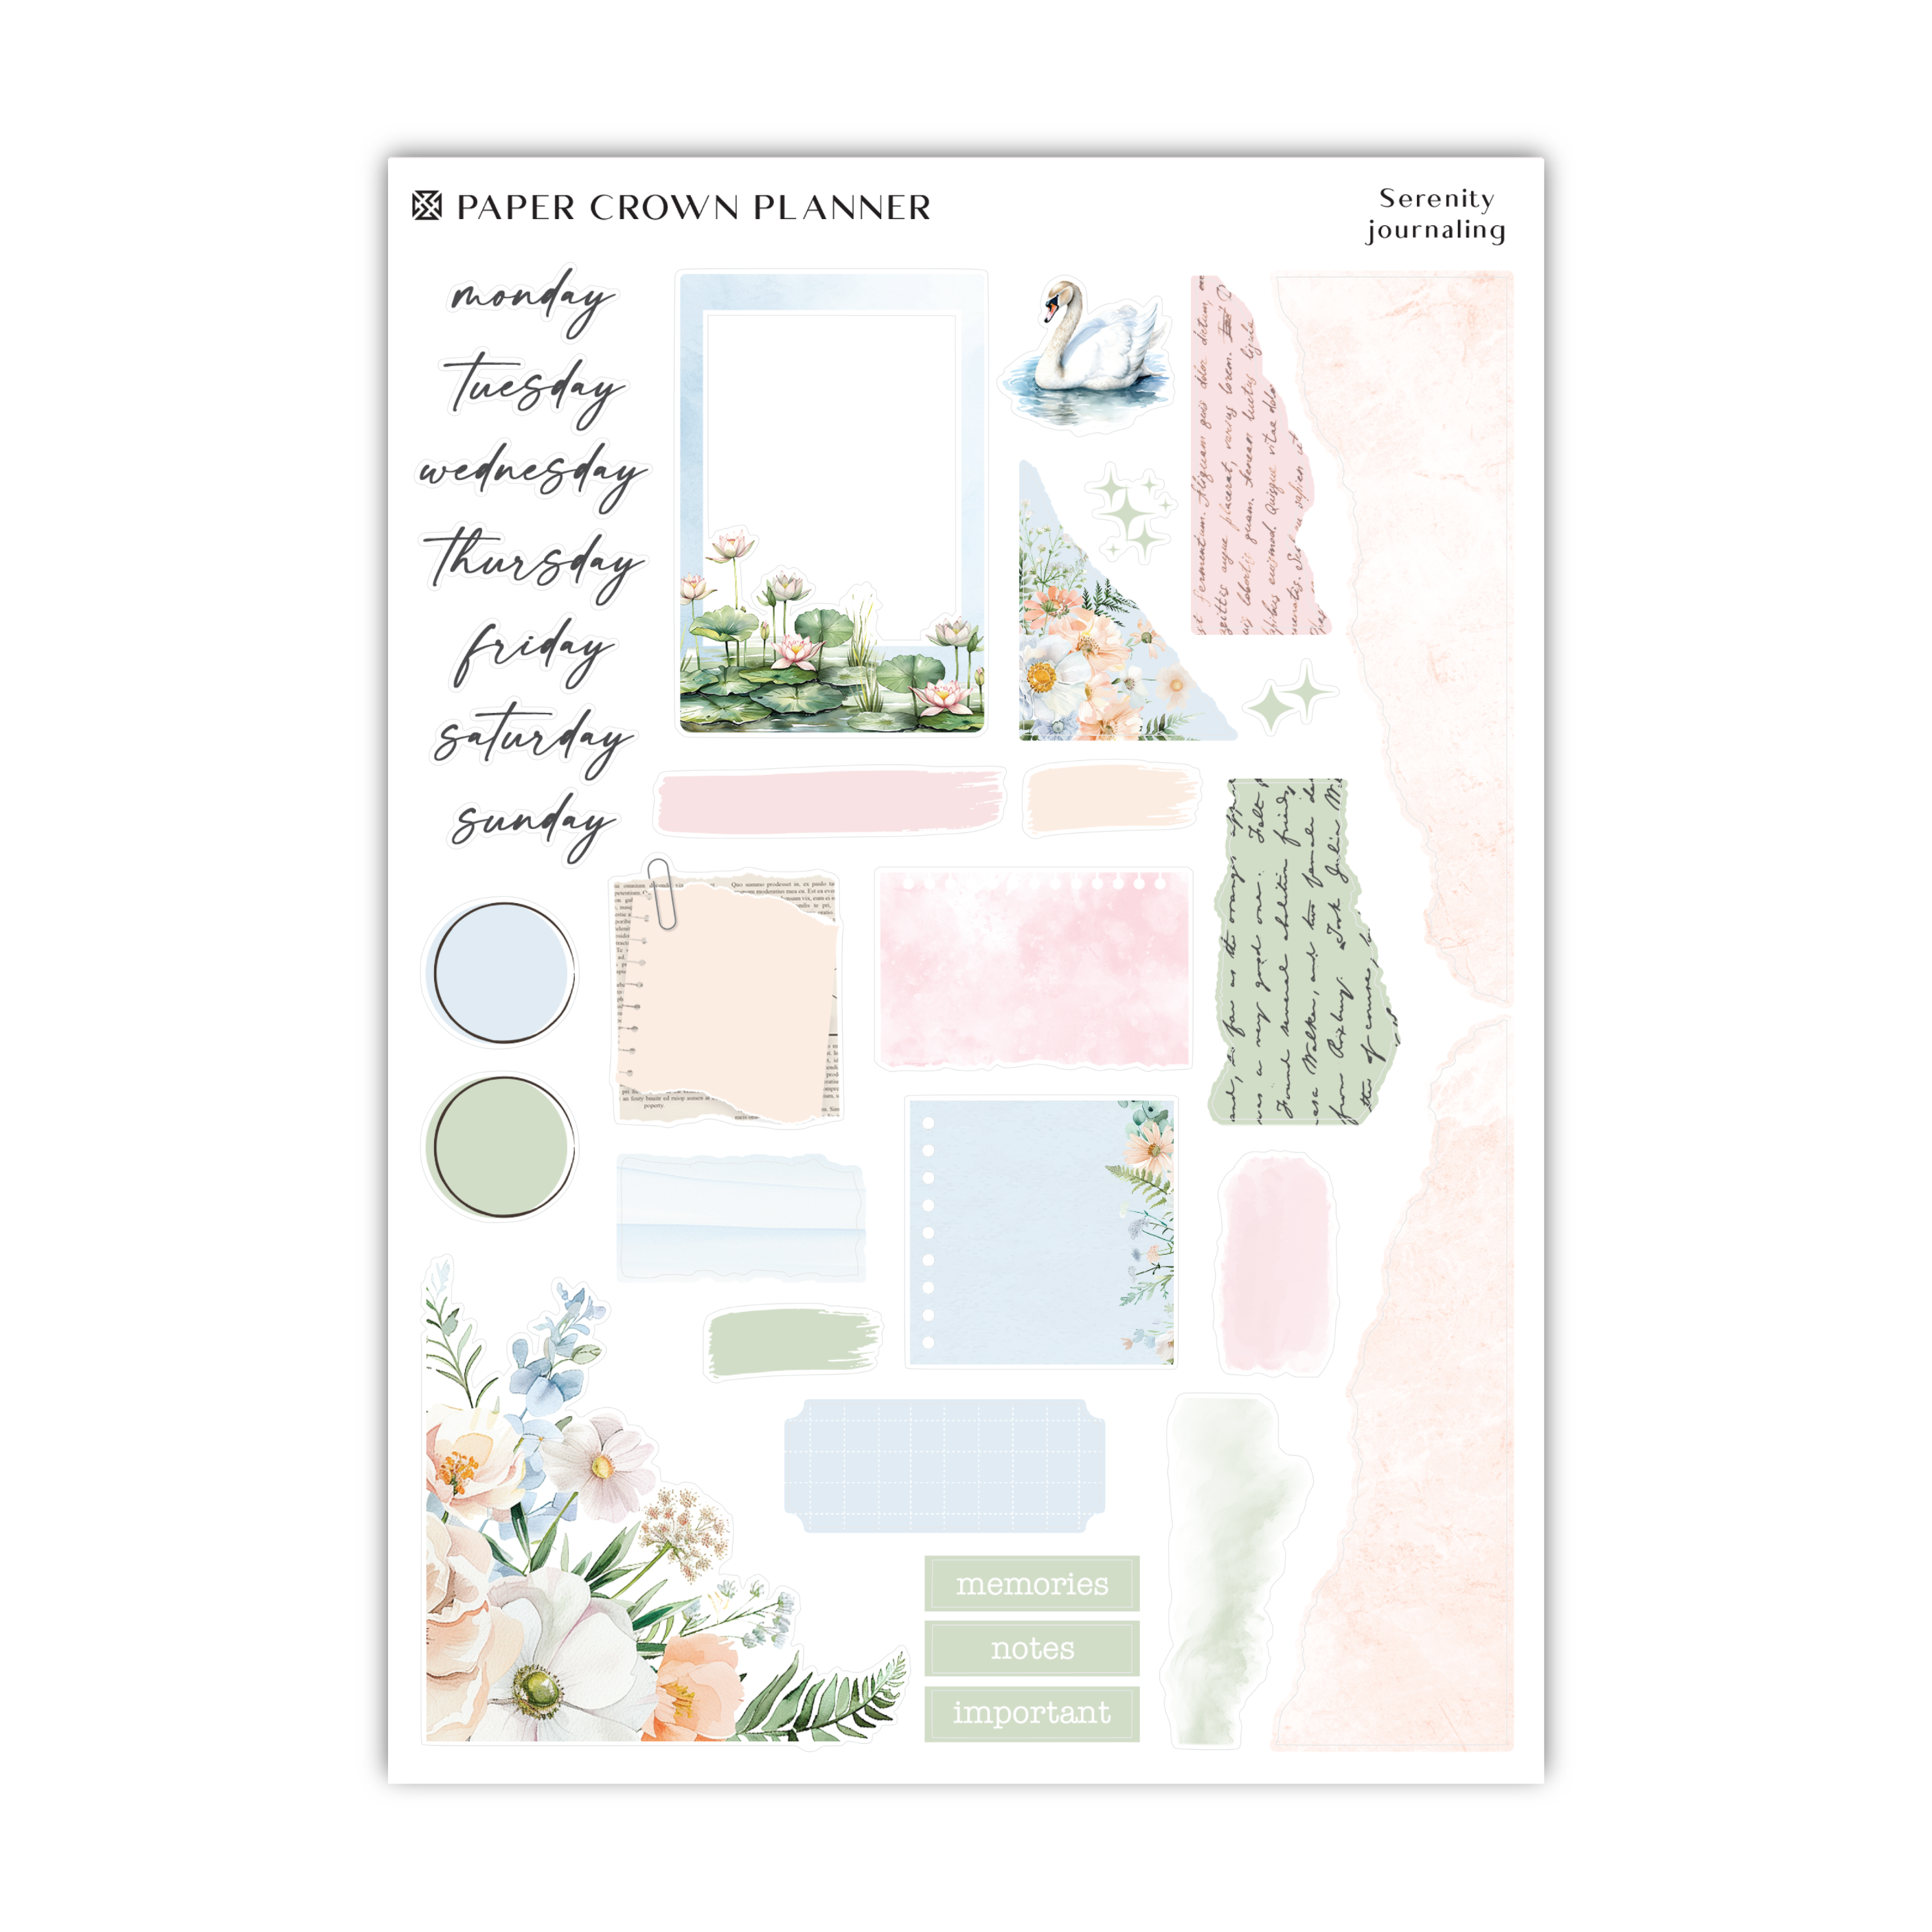 a paper growth planner with flowers and plants